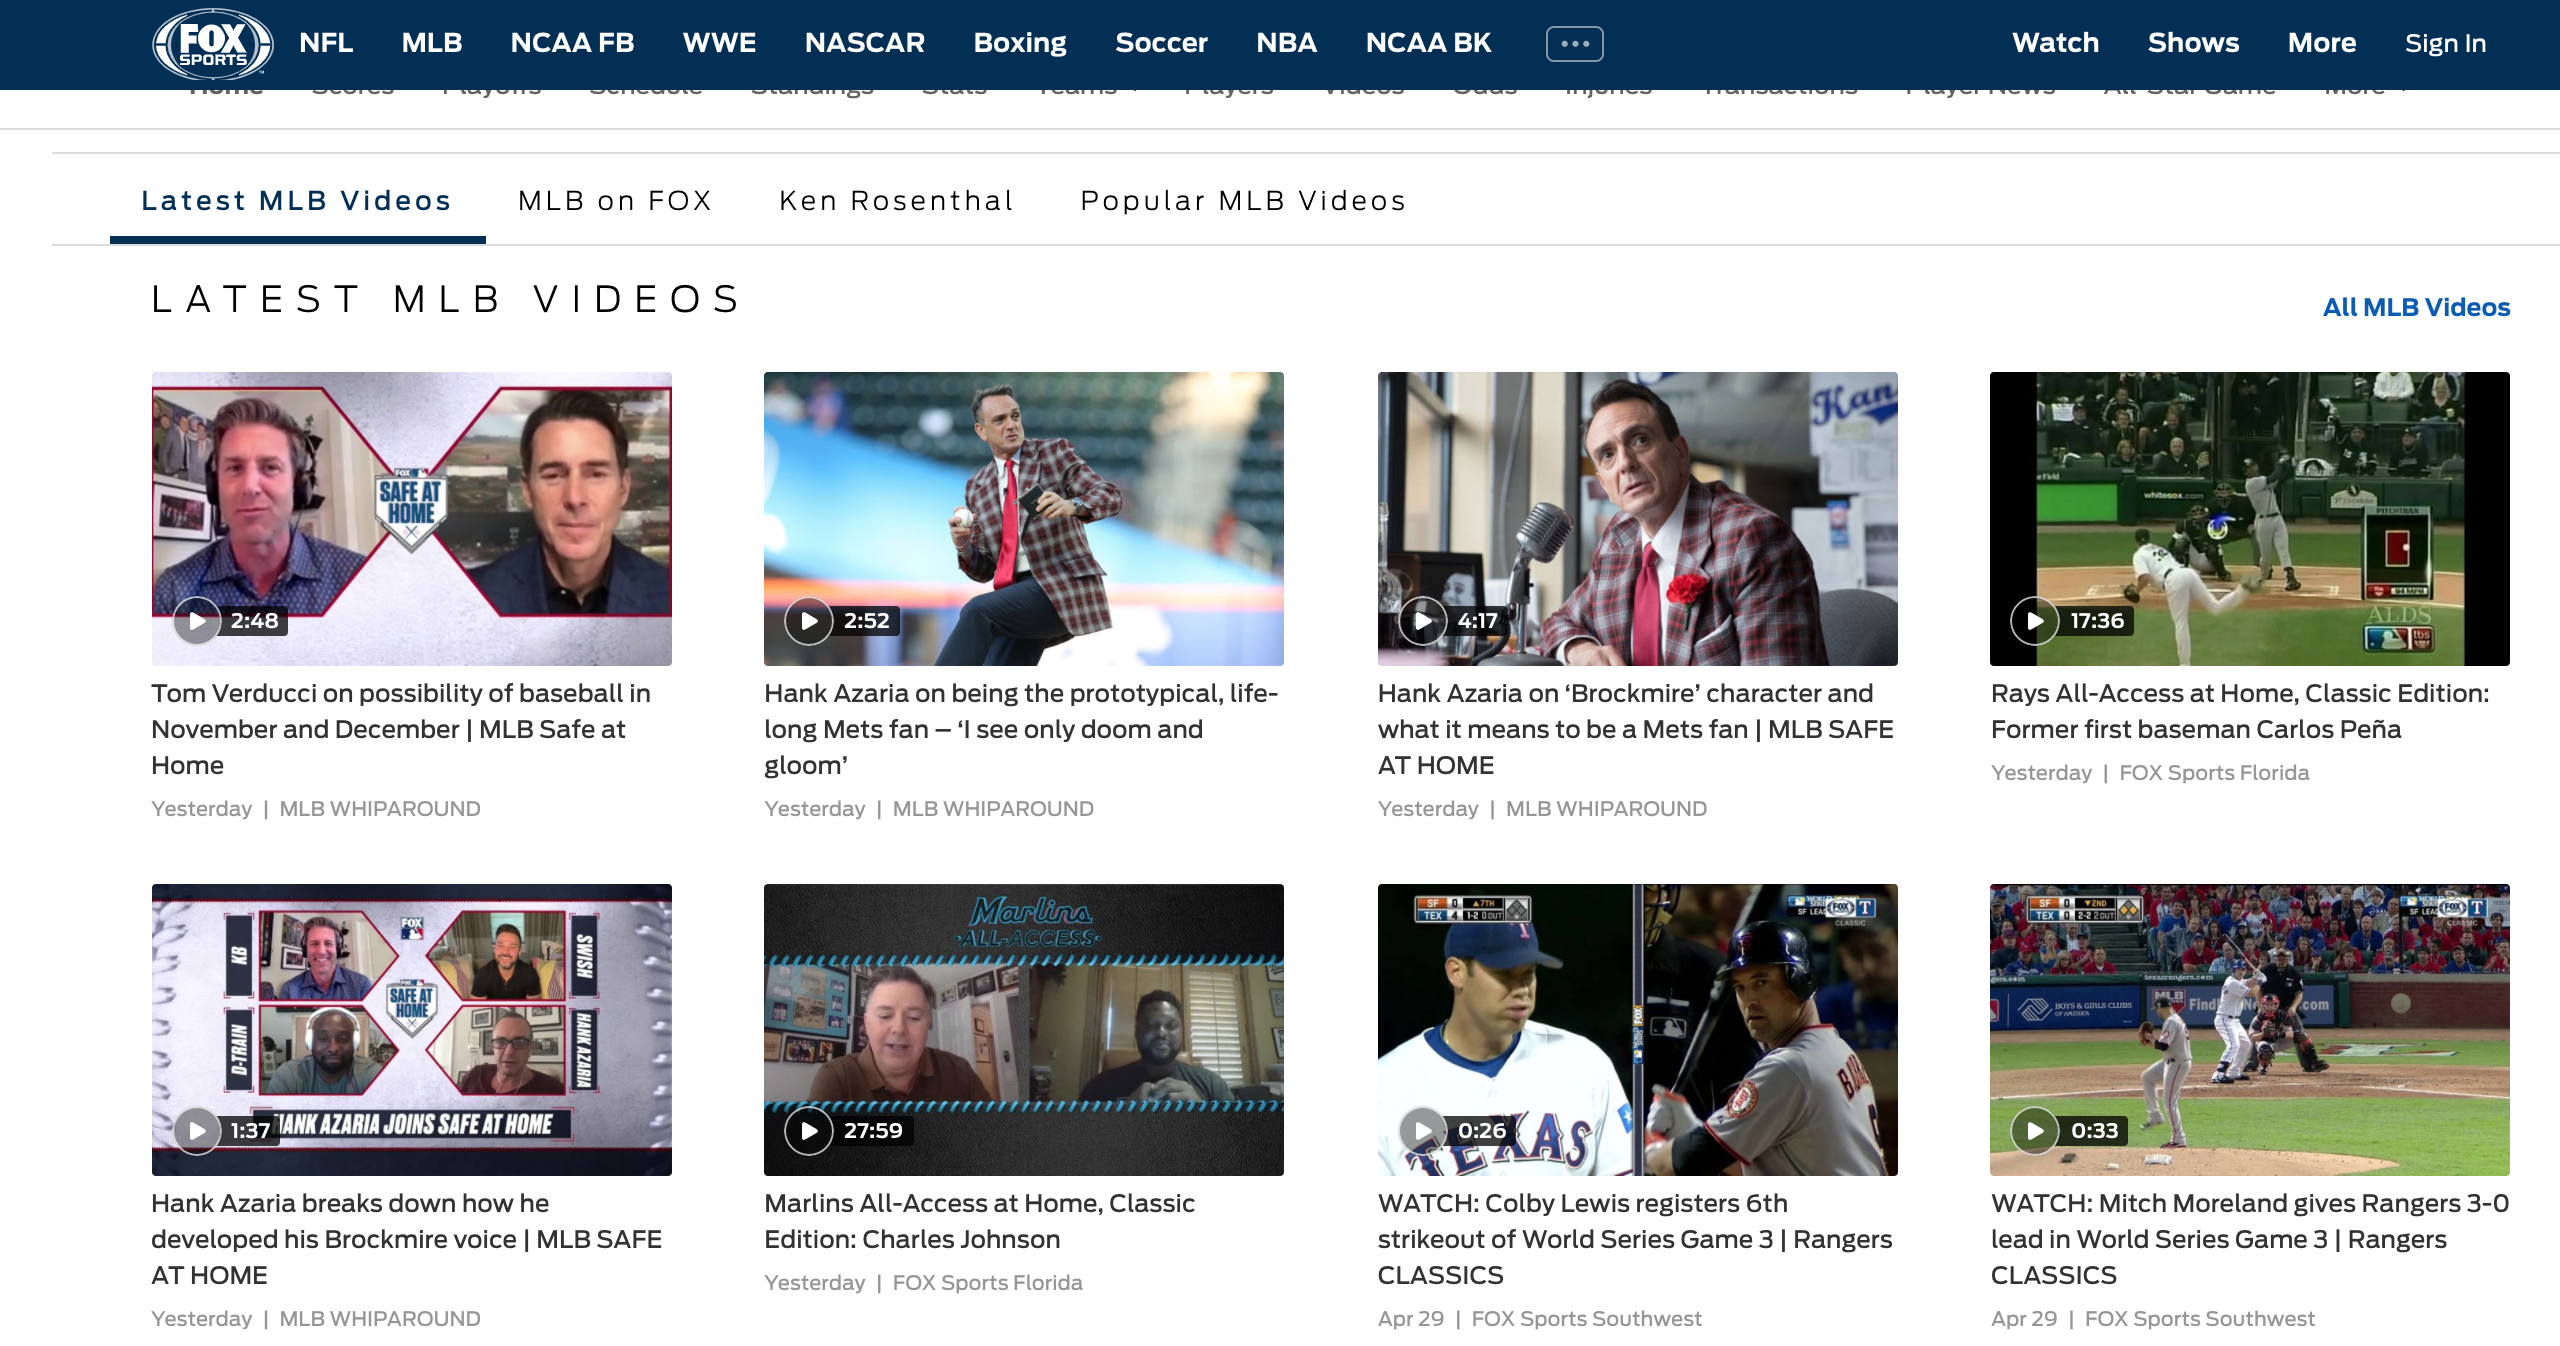 Fox Sports now creating memorable domains to help customers find the content they want